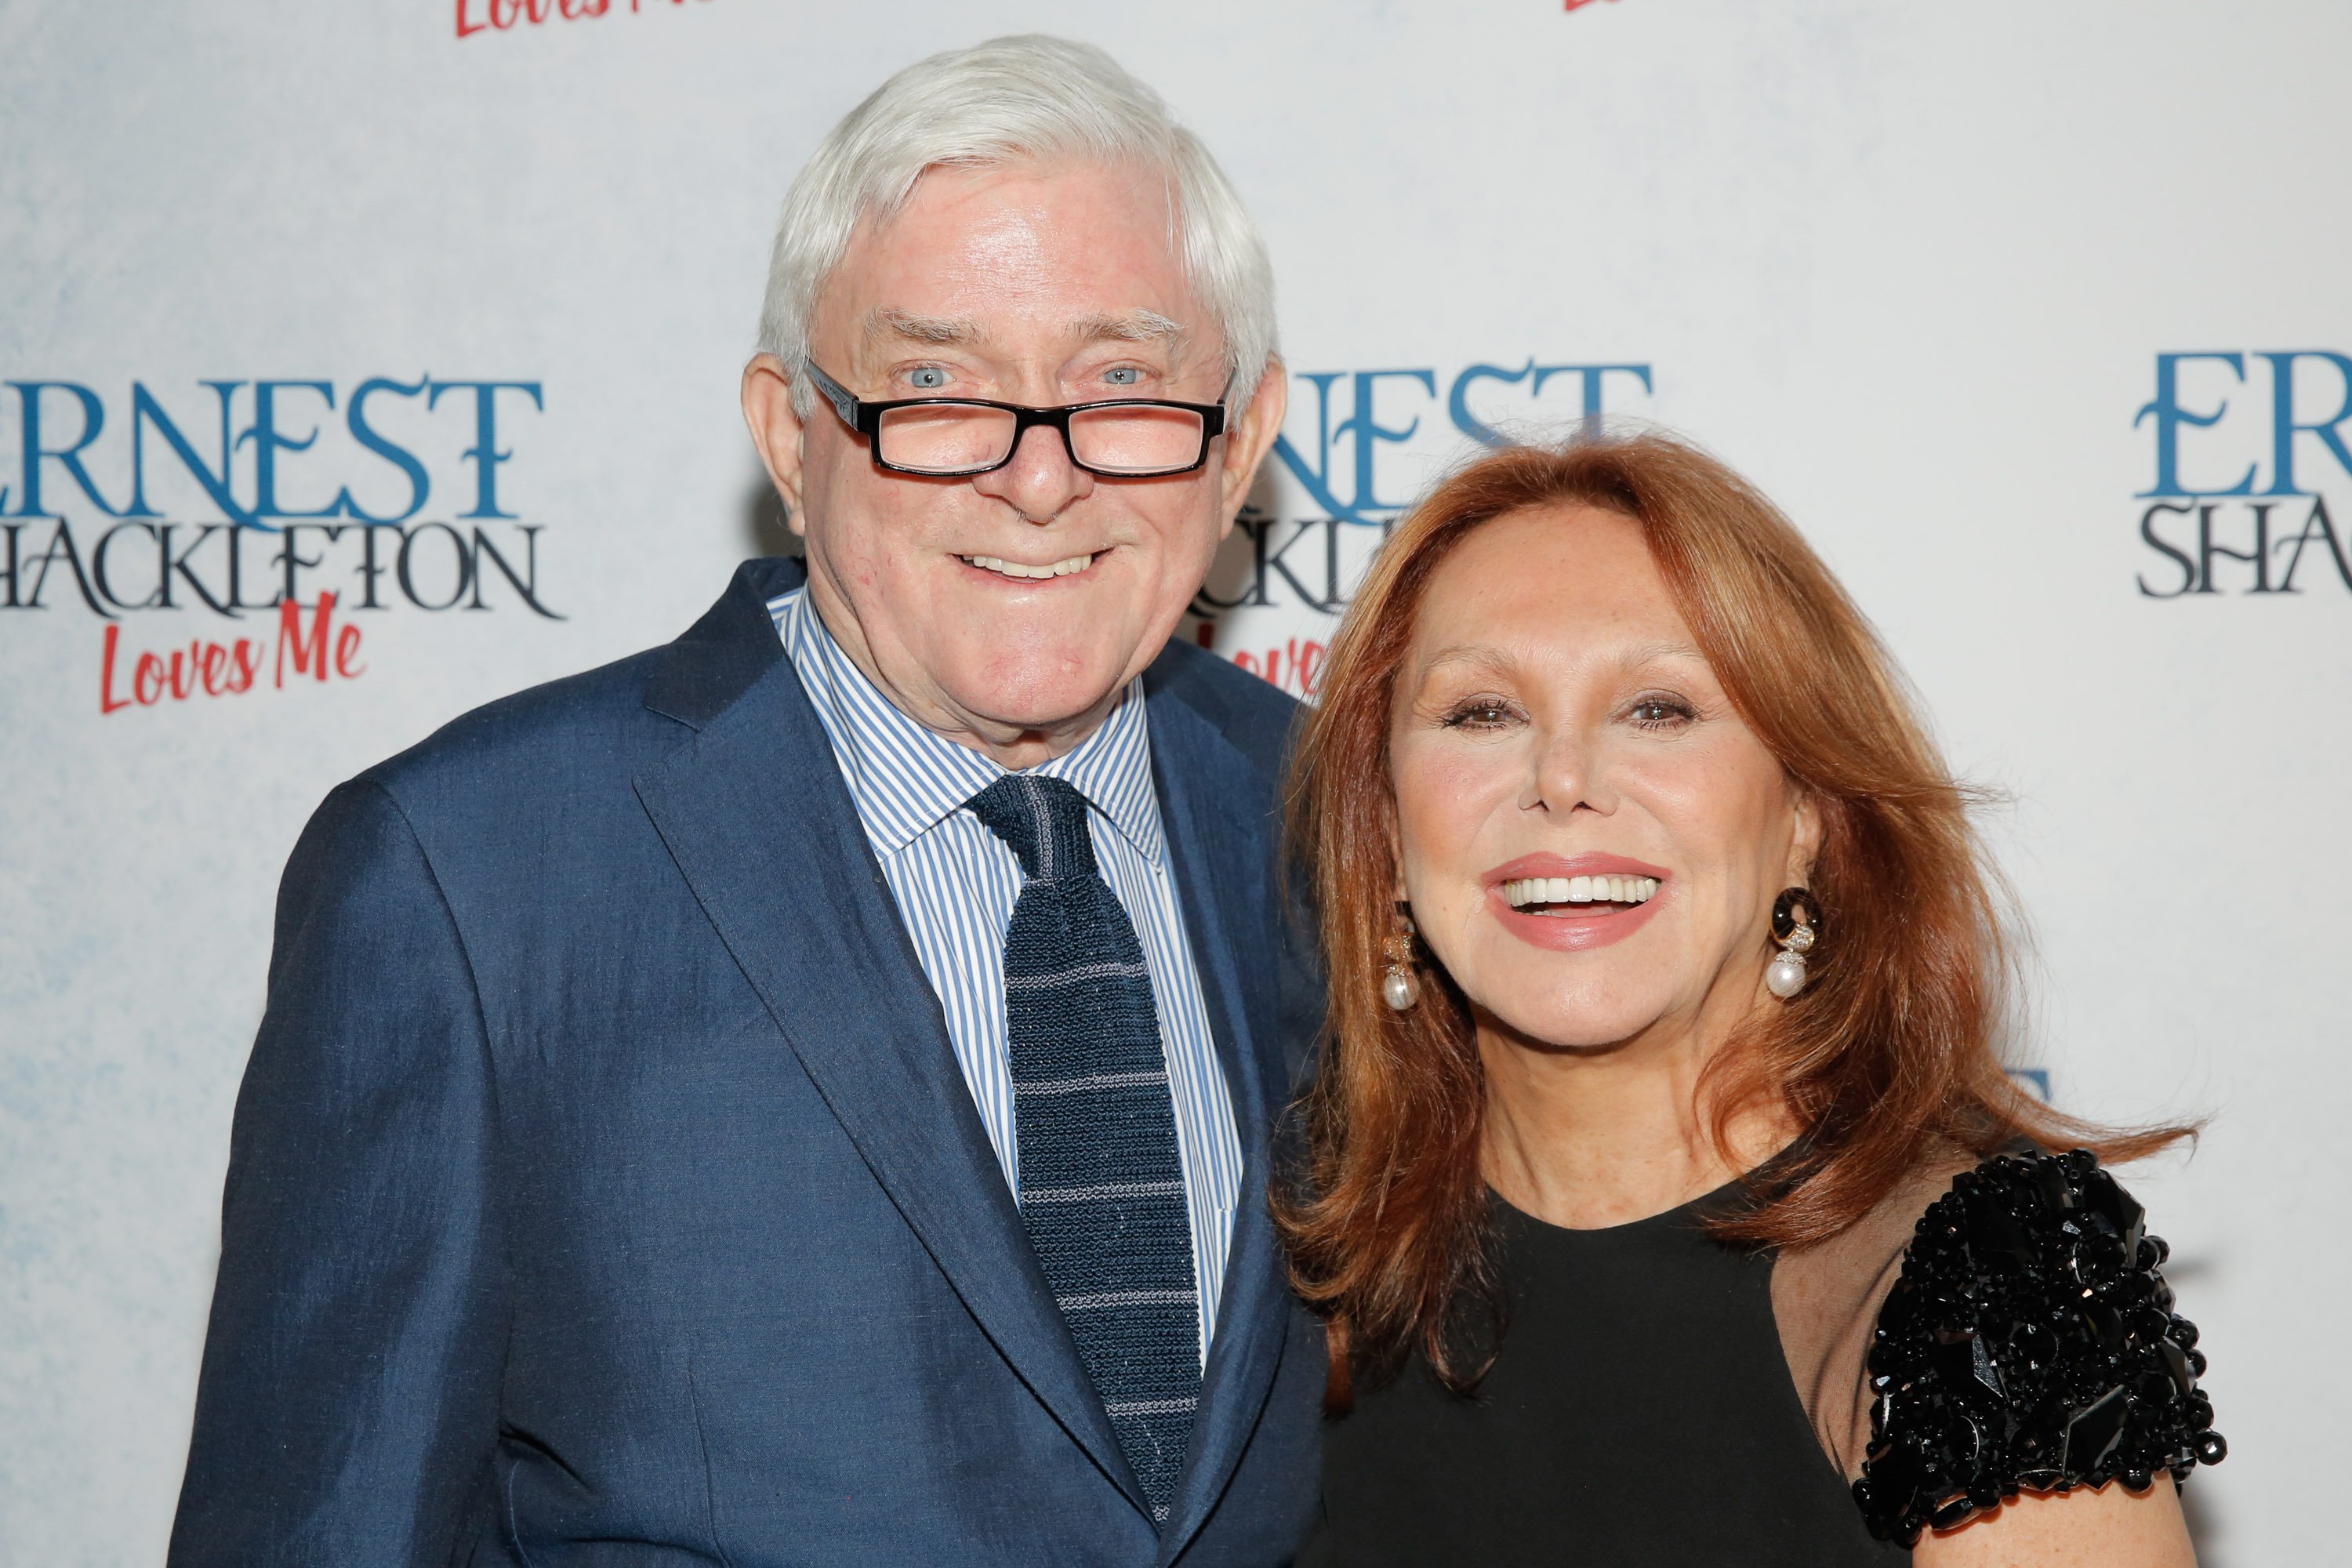 Phil Donahue and Marlo Thomas attend the Off-Broadway opening of "Ernest Shackleton Loves Me" at the Tony Kiser Theatre on May 7, 2017 | Photo: GettyImages